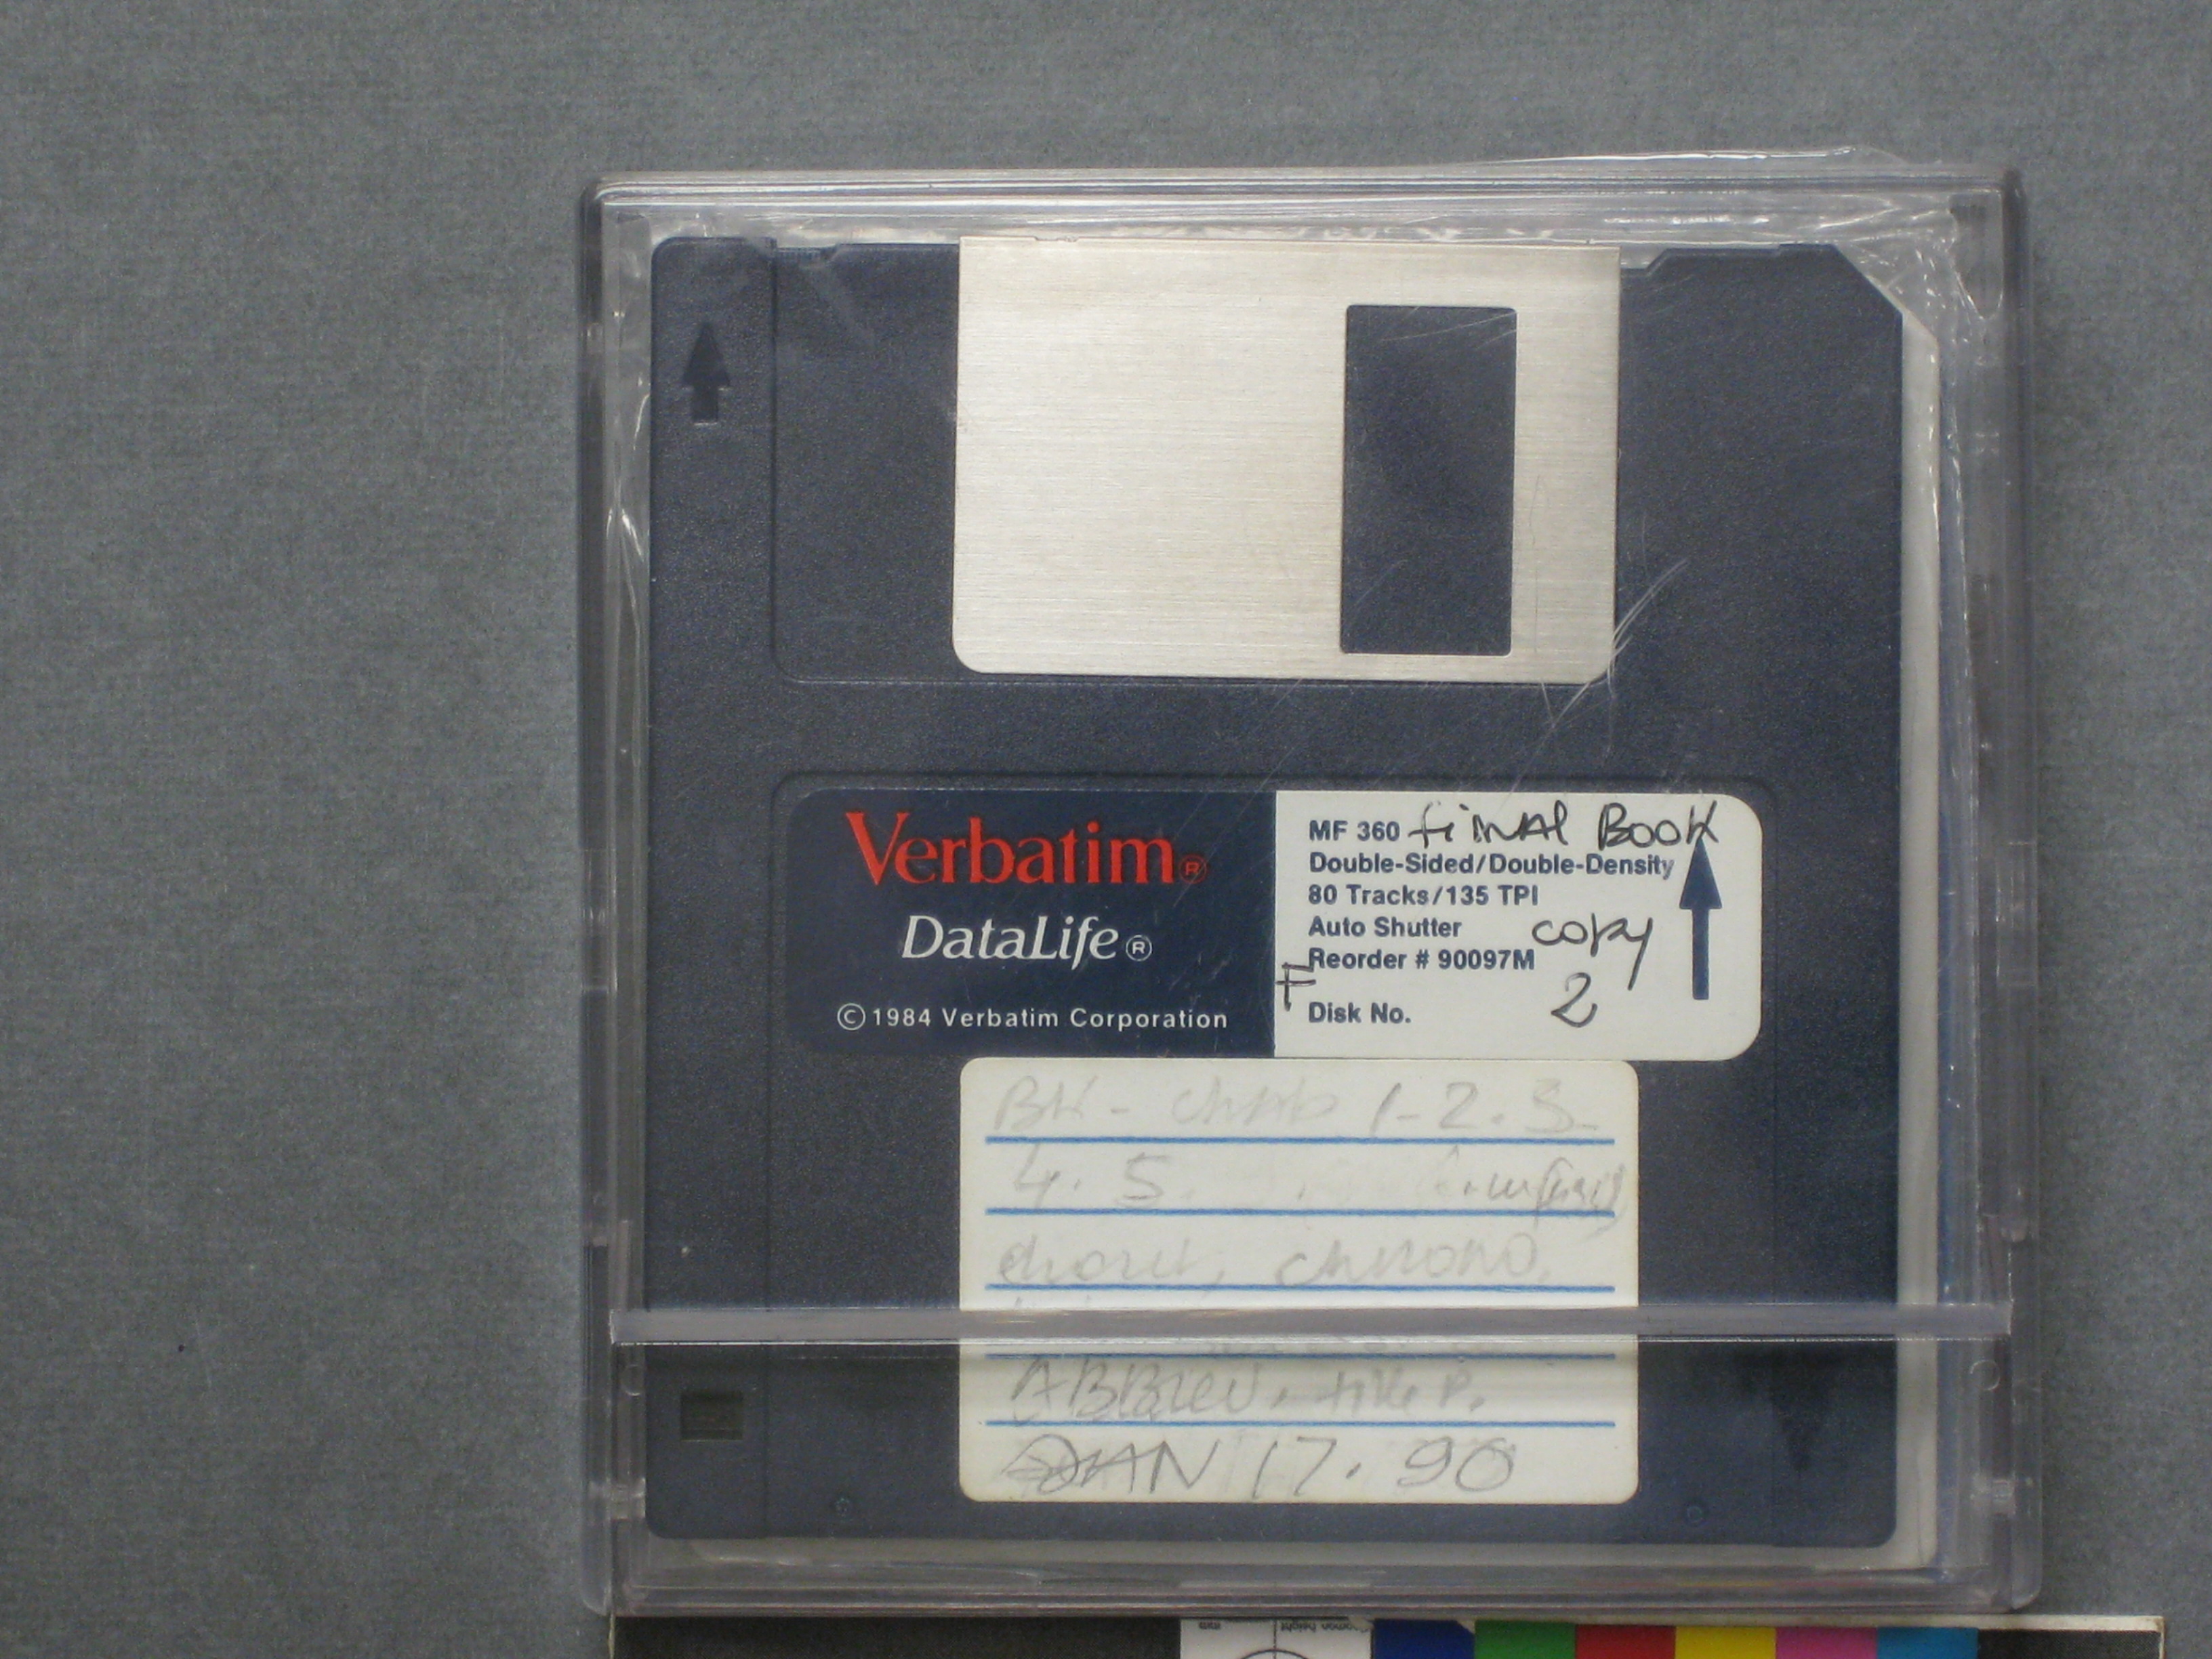 An old floppy disk from the 1990s inside a plastic case